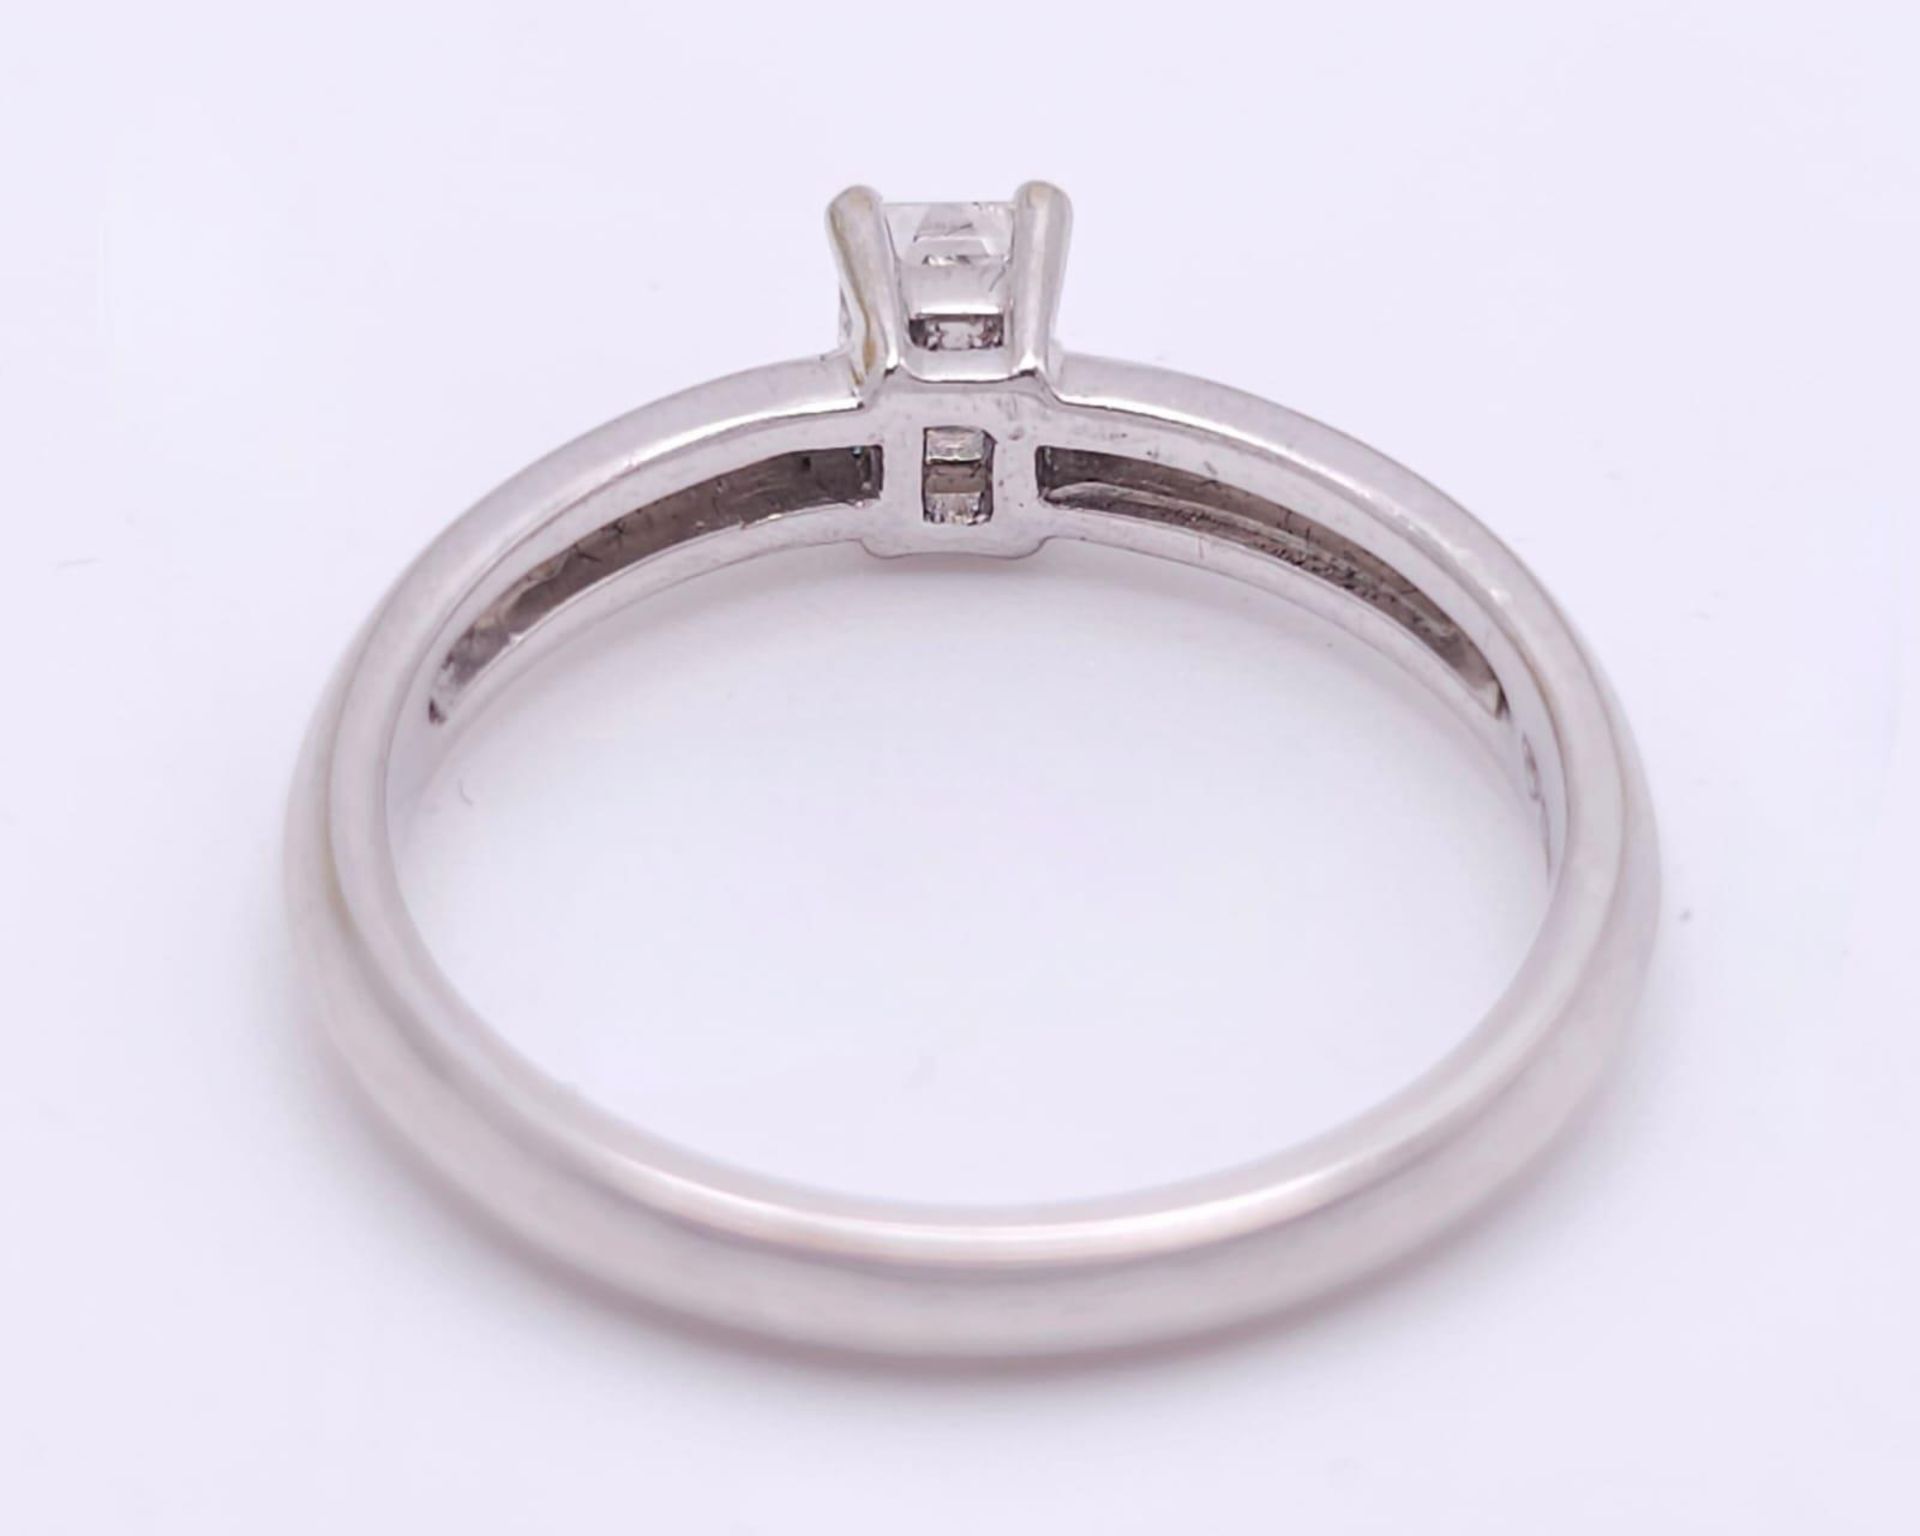 AN 18K WHITE GOLD EMERALD CUT DIAMOND SOLITAIRE RING. 0.34CT. 3.6G. SIZE N. - Image 4 of 6